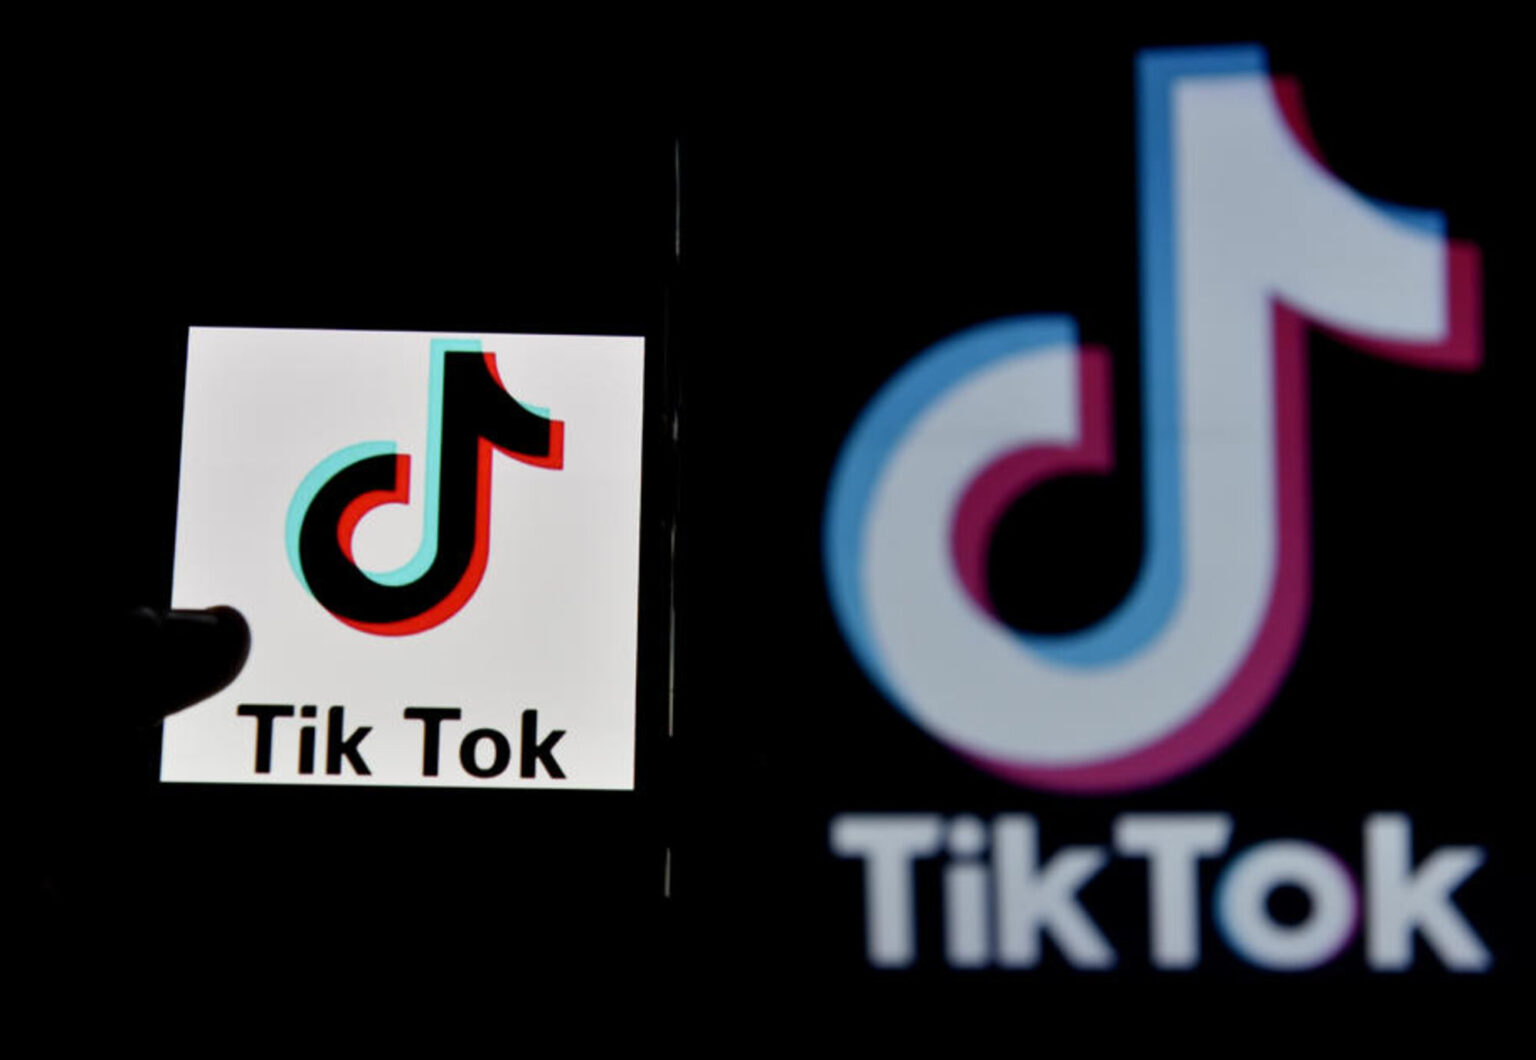 Can TikTok survive in the U.S.? Only if a company buys them in the next 45 days; which company might be able to do this in time?